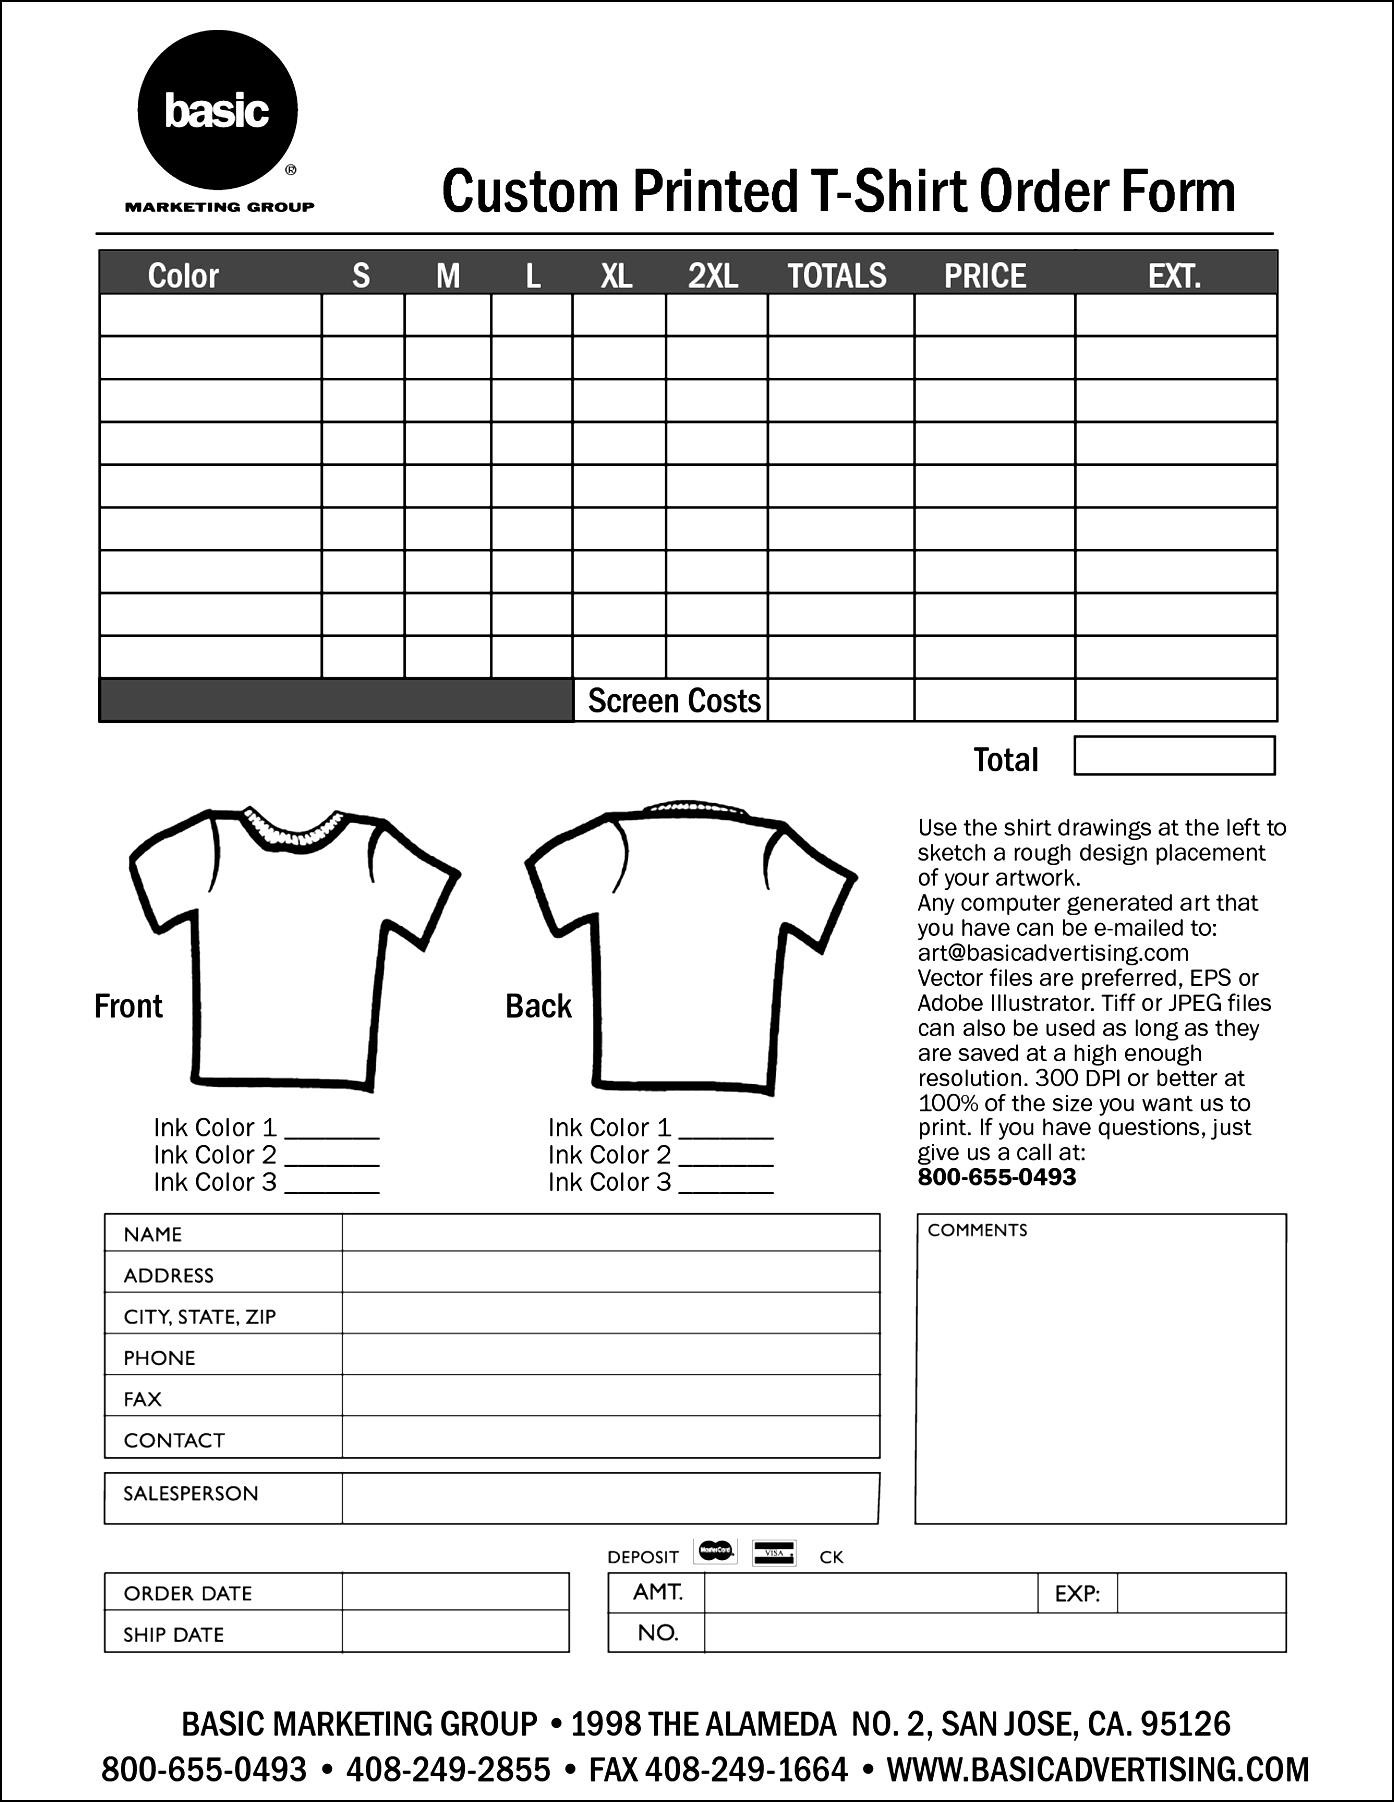 shirt order form template excel   Ecza.solinf.co